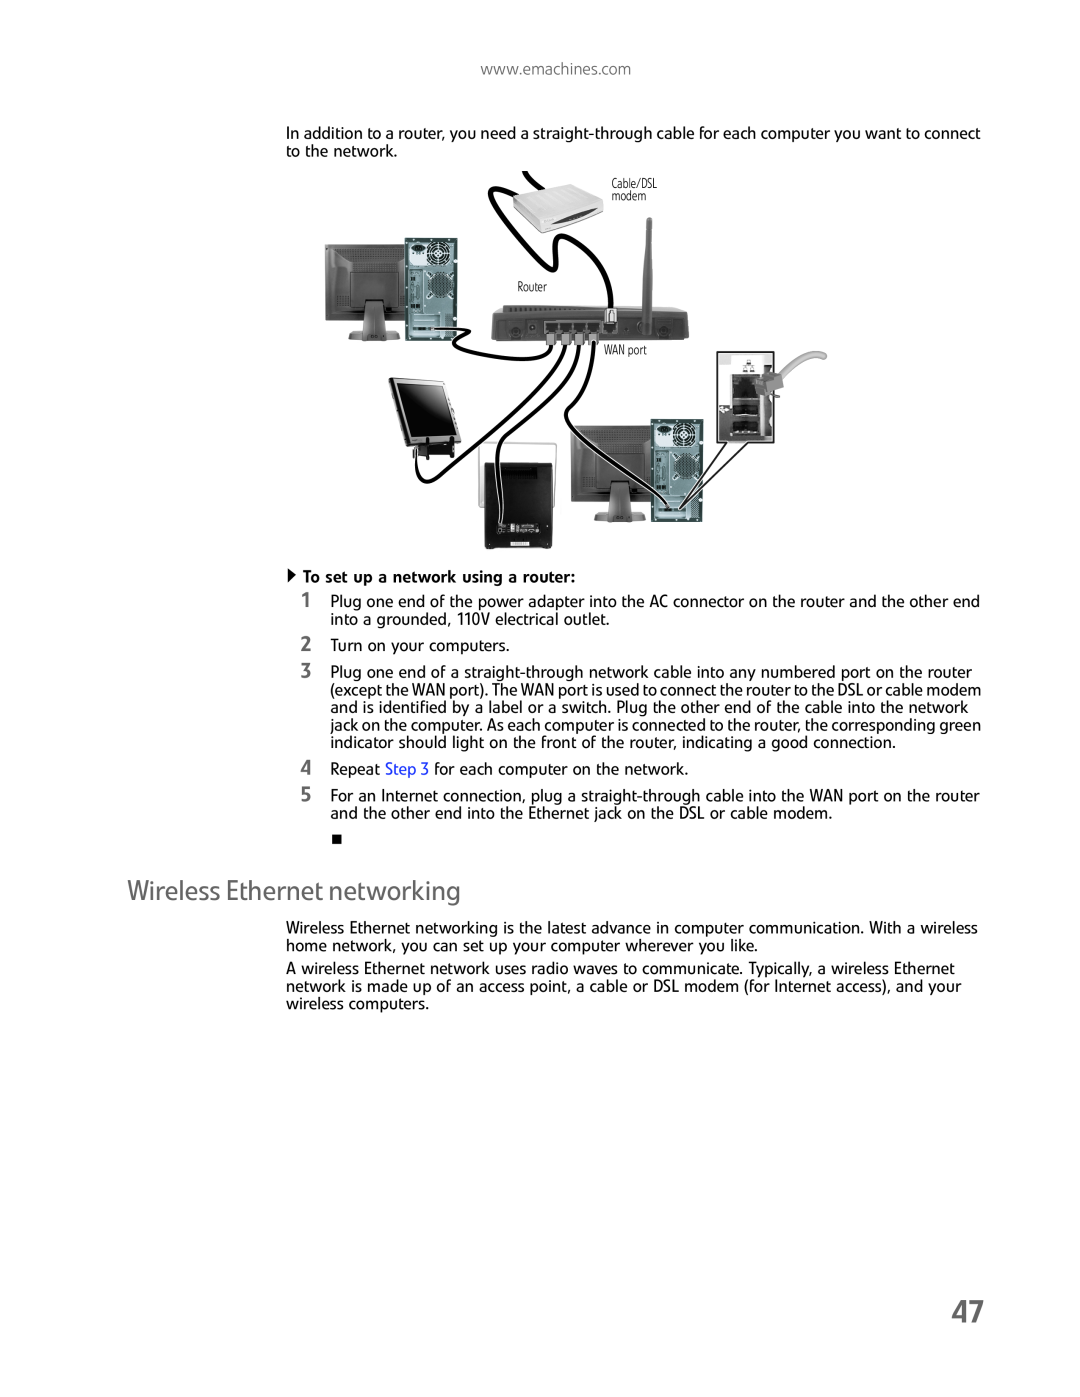 eMachines EL1200 Series manual Wireless Ethernet networking 